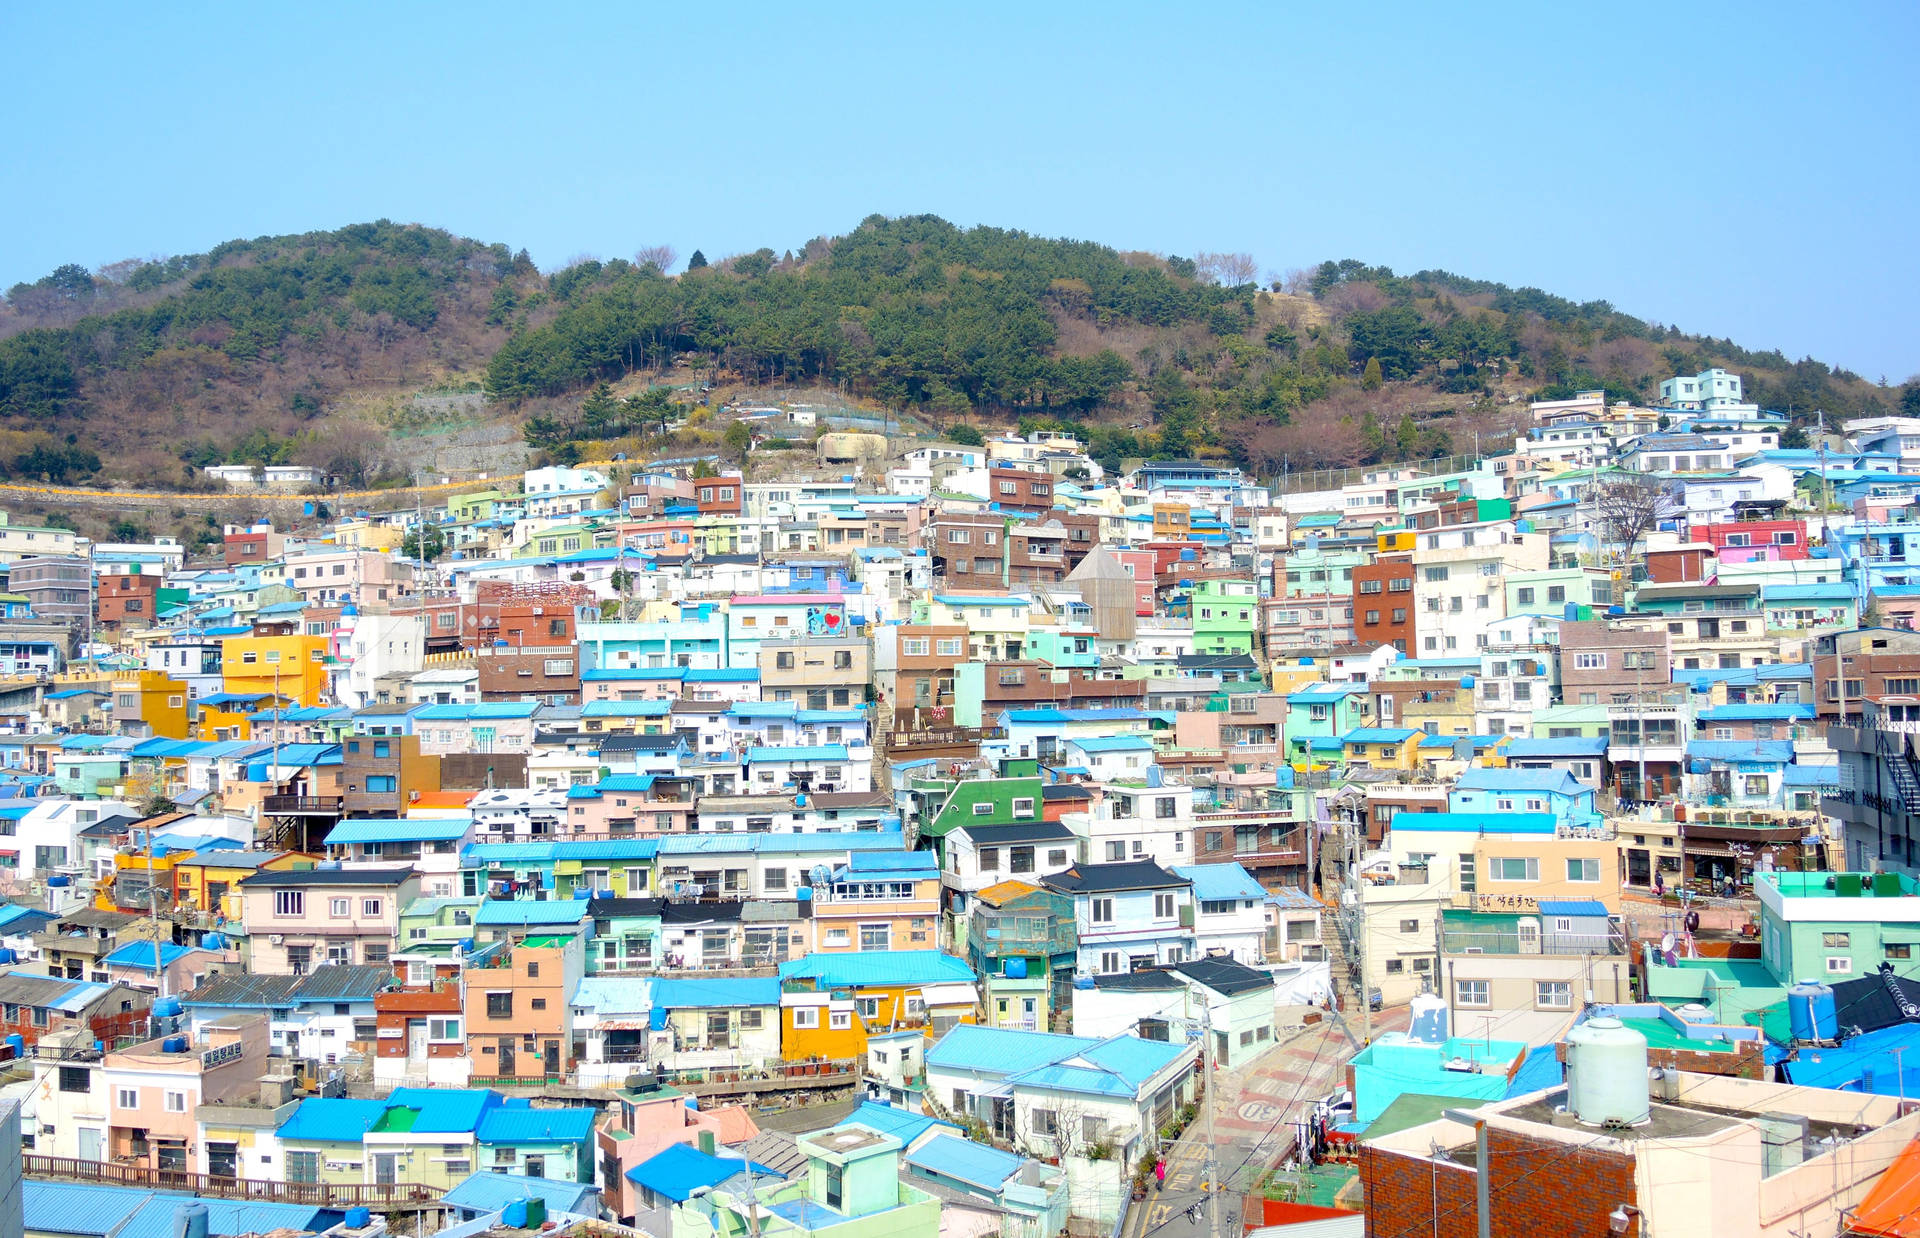 Busan Residential Area Background